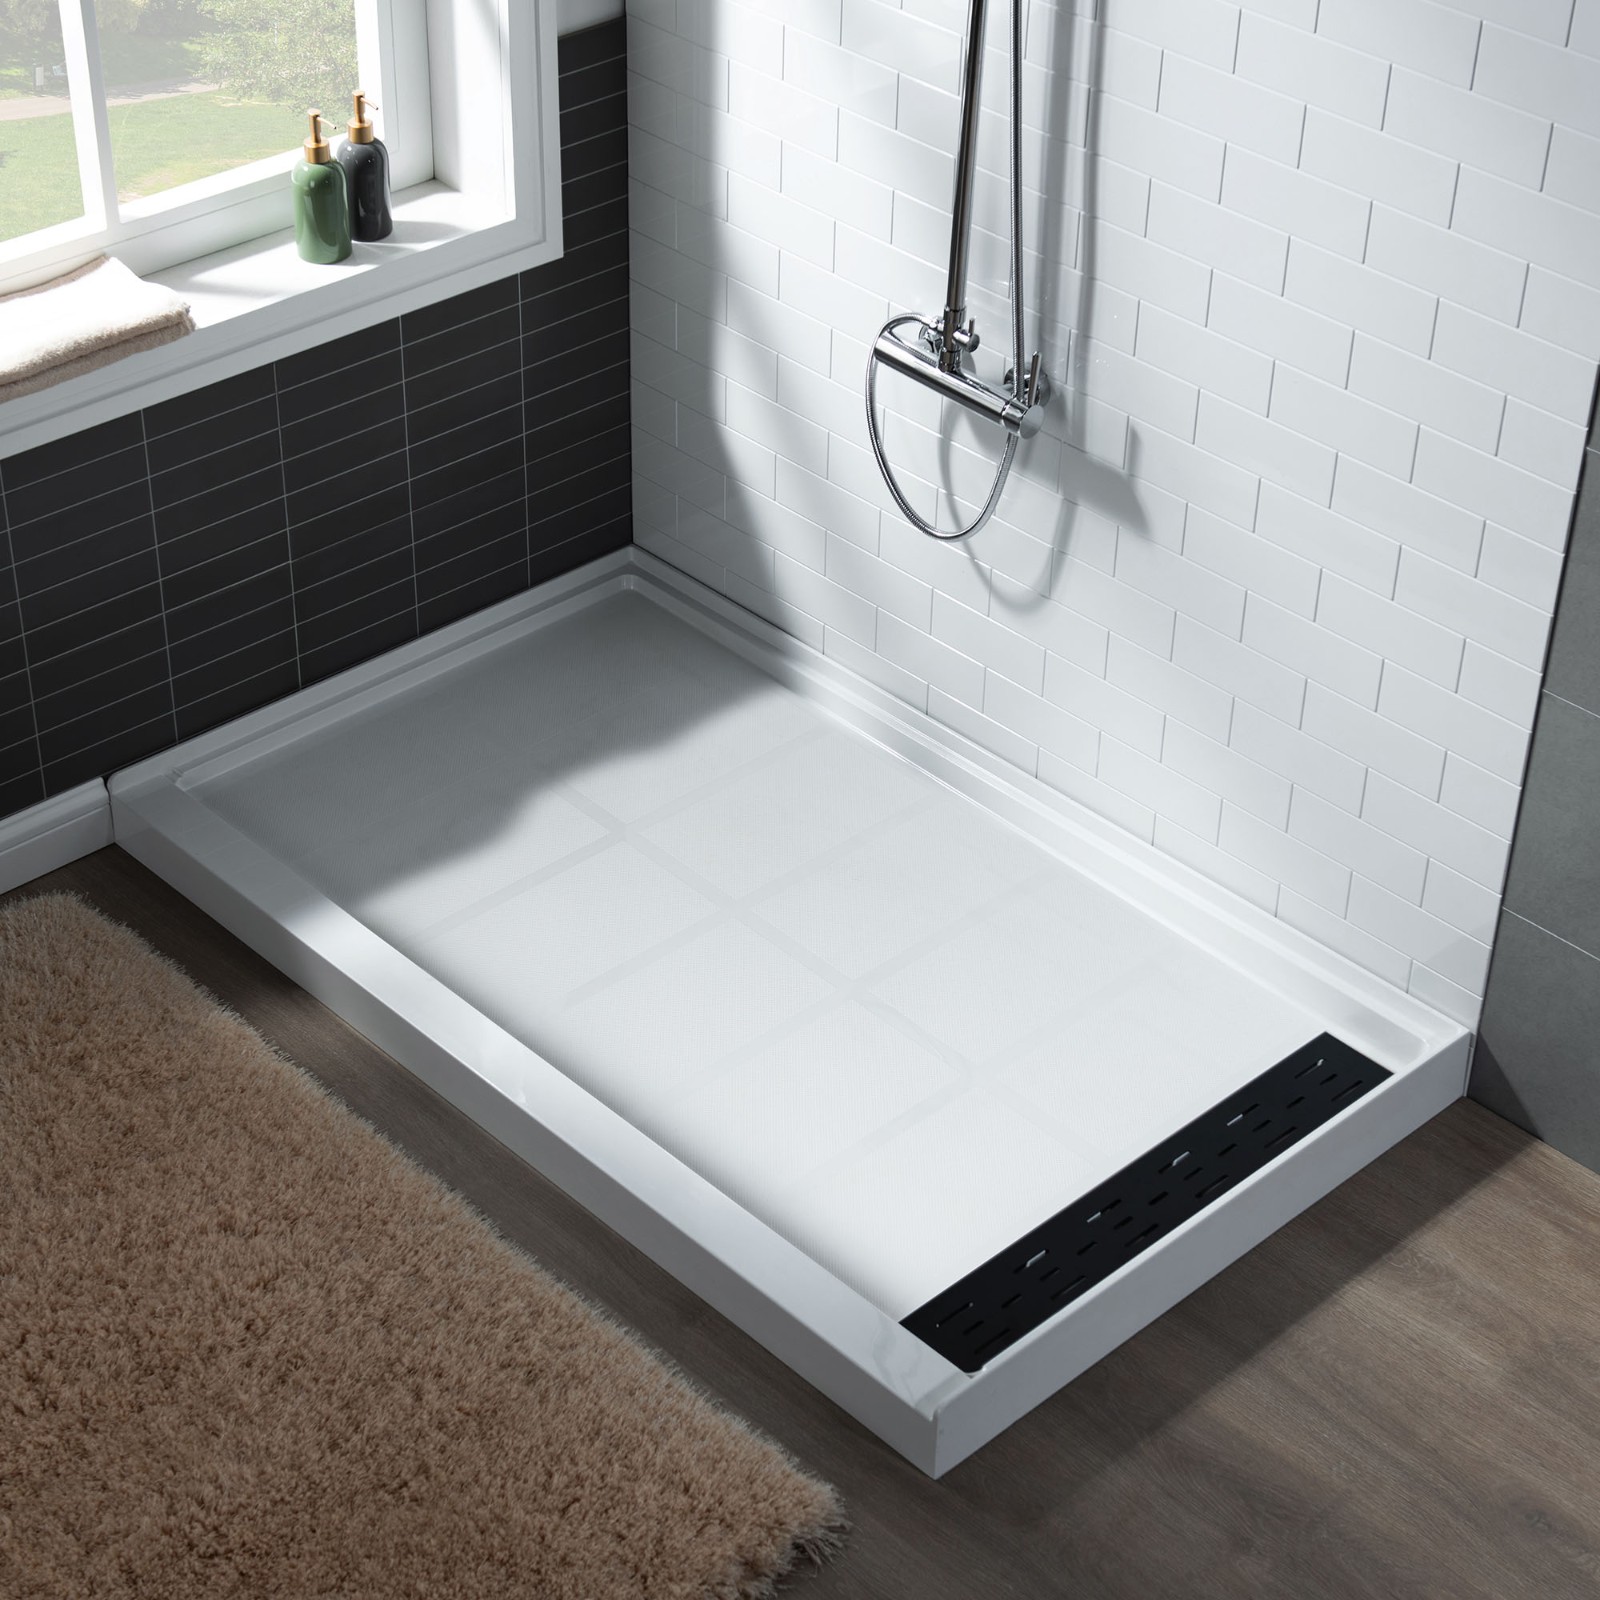  WOODBRIDGE SBR4832-1000R-MB SolidSurface Shower Base with Recessed Trench Side Including Matte Black Linear Cover, 48